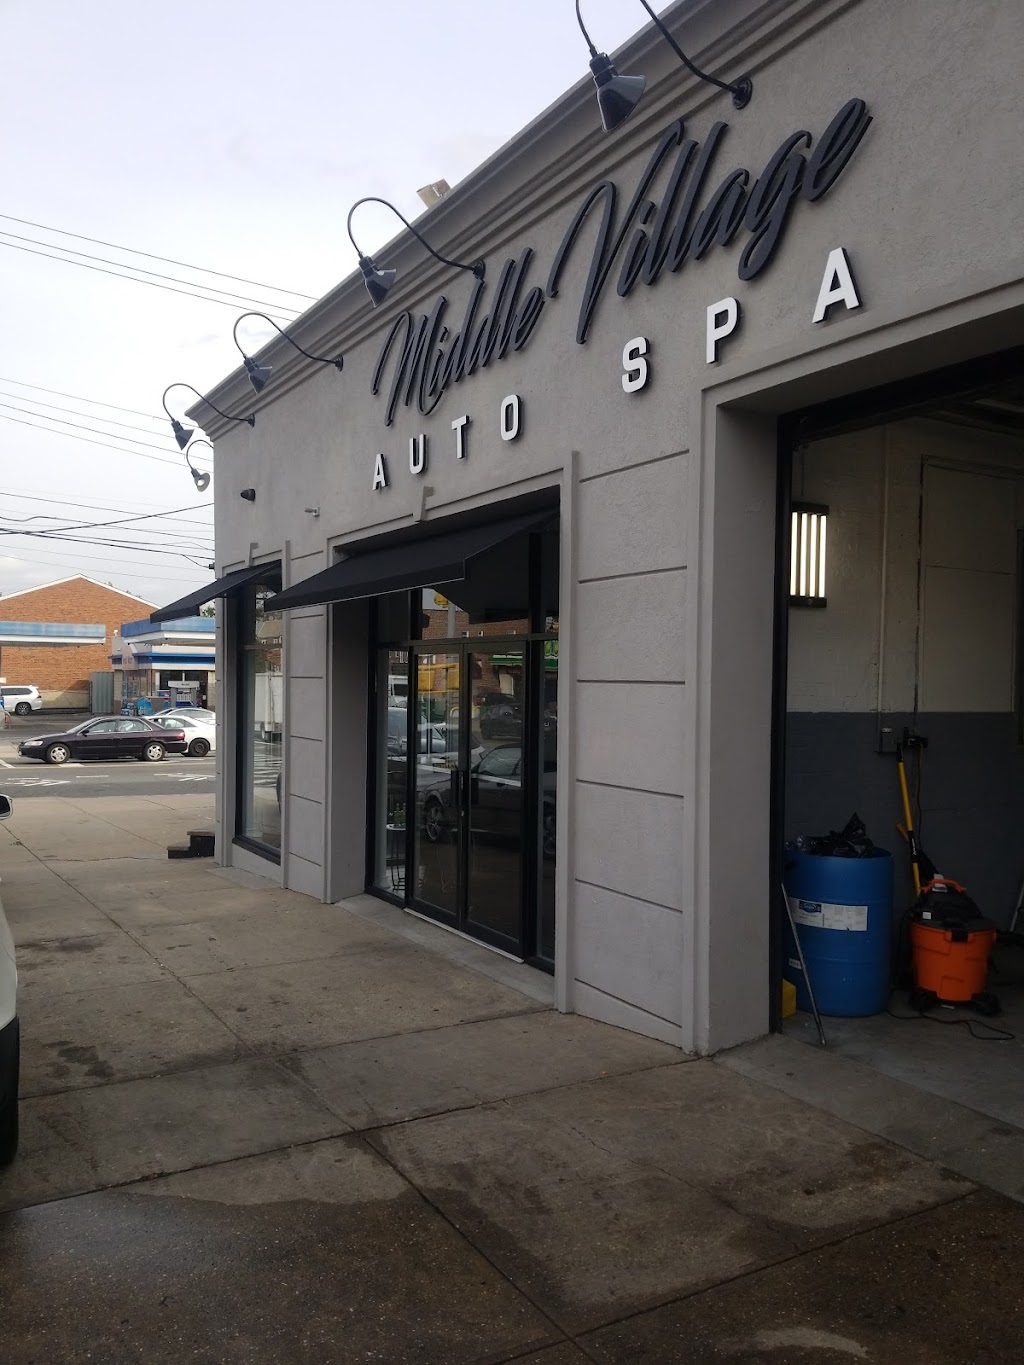 Middle Village Auto Spa | 61-02 69th St, Queens, NY 11379 | Phone: (718) 326-2969